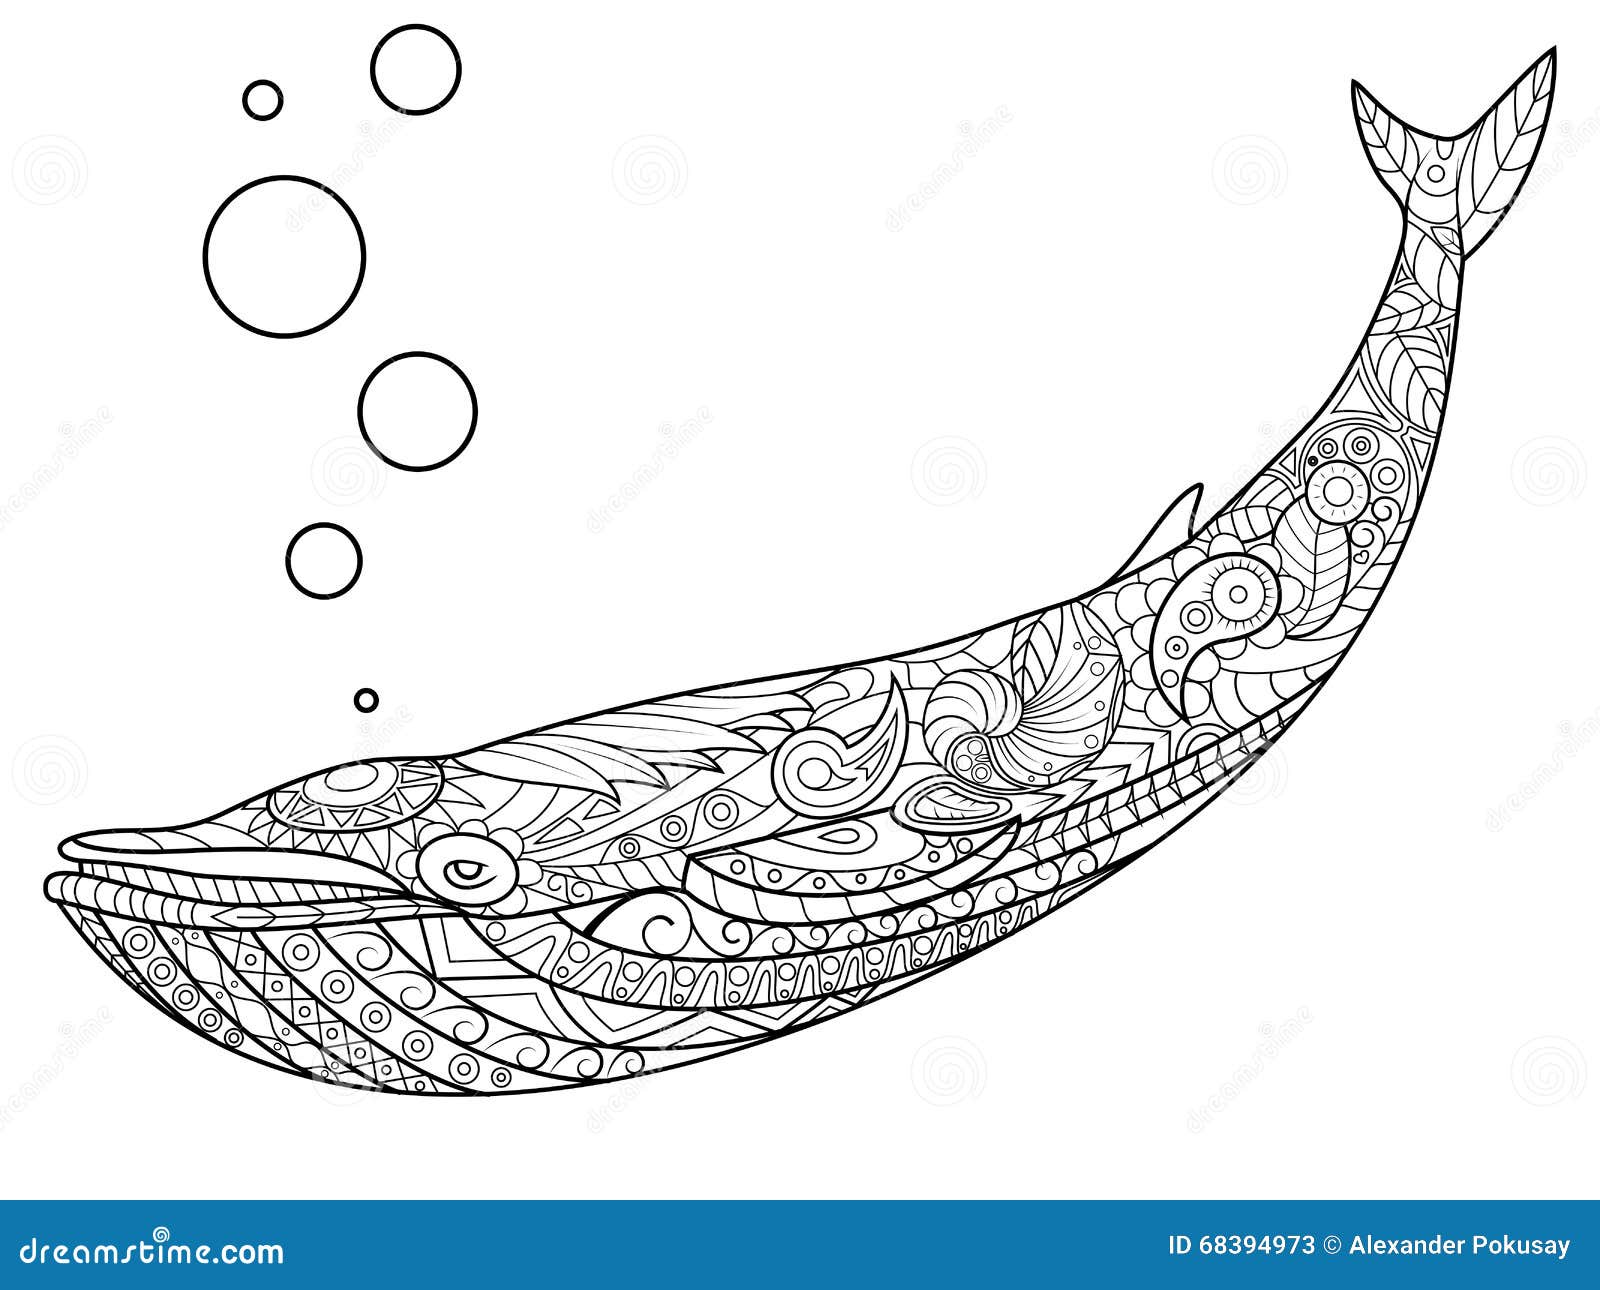 Whale coloring book for adults vector